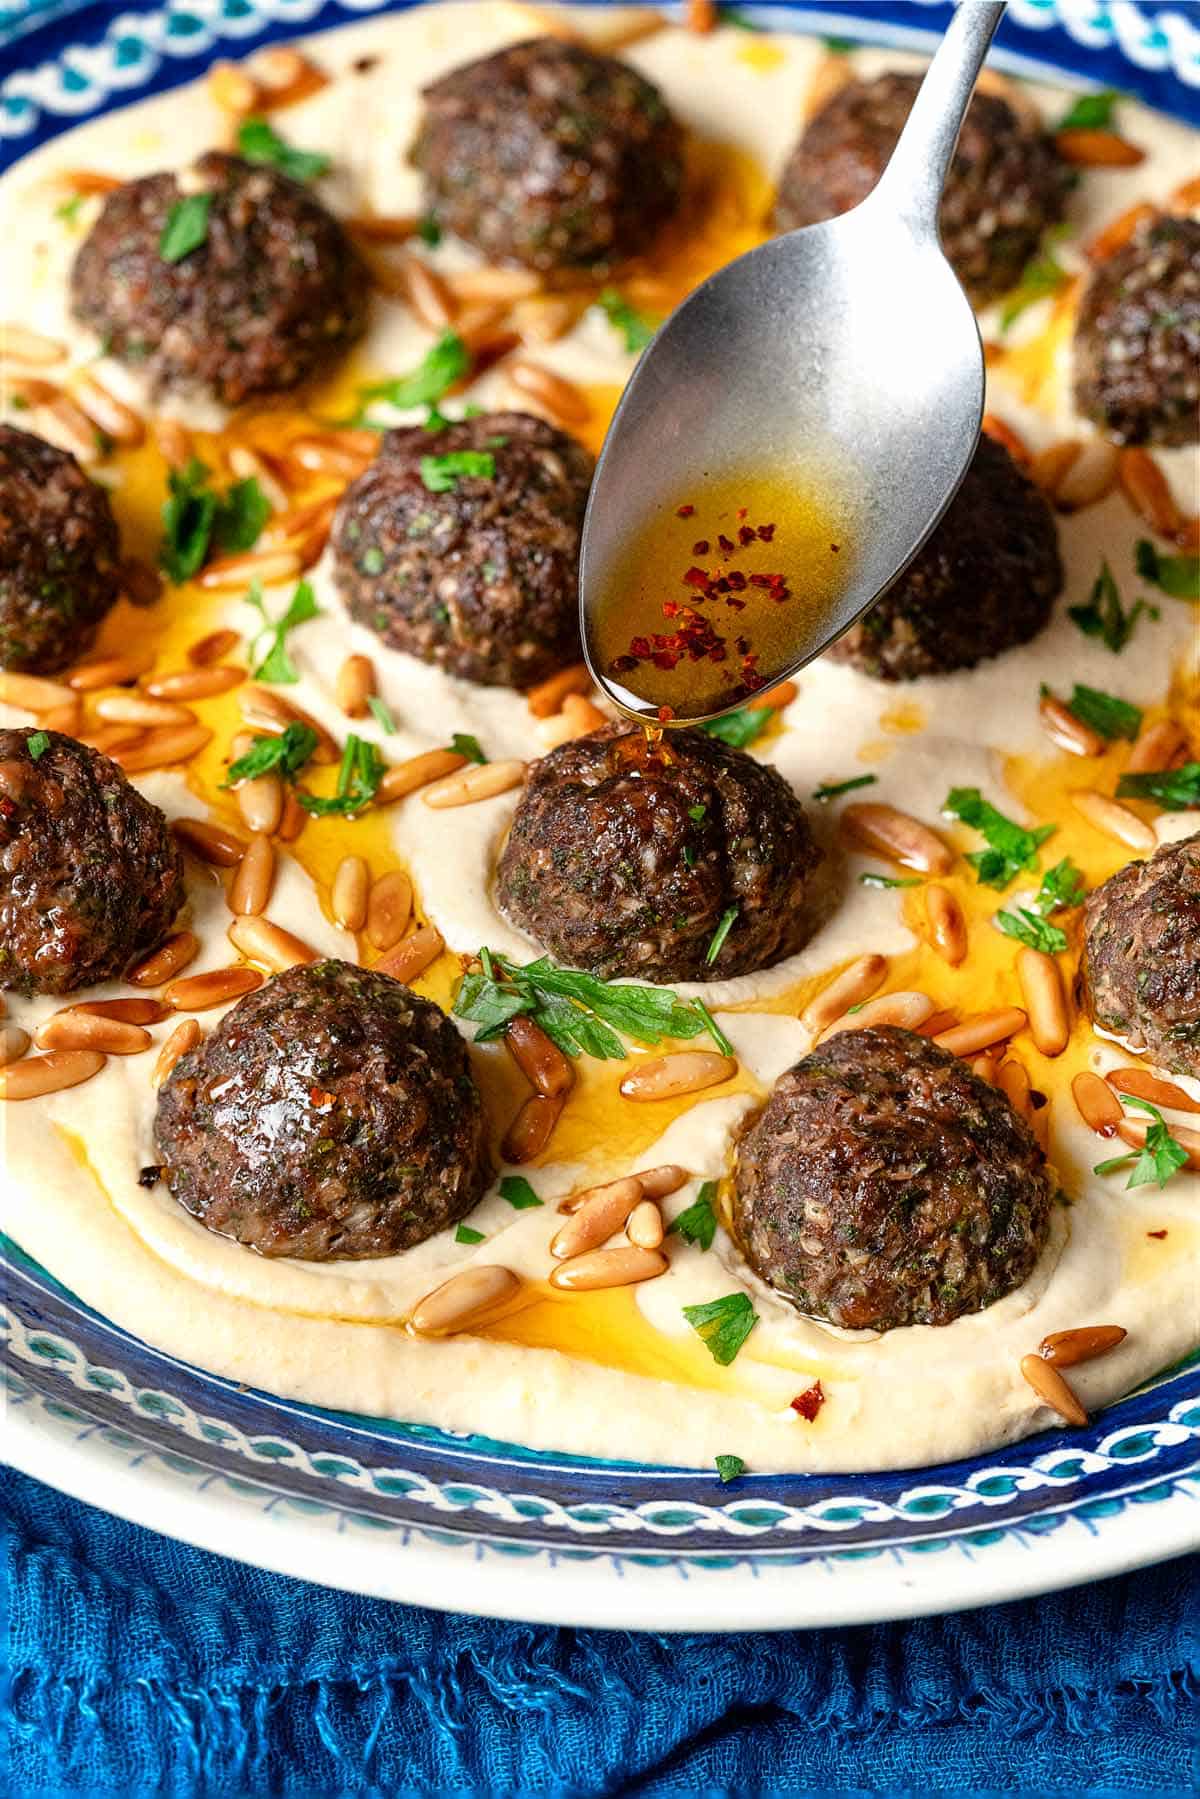 a close up of aleppo pepper infused olive oil being drizzled onto a plate of meatballs over hummus with a spoon.